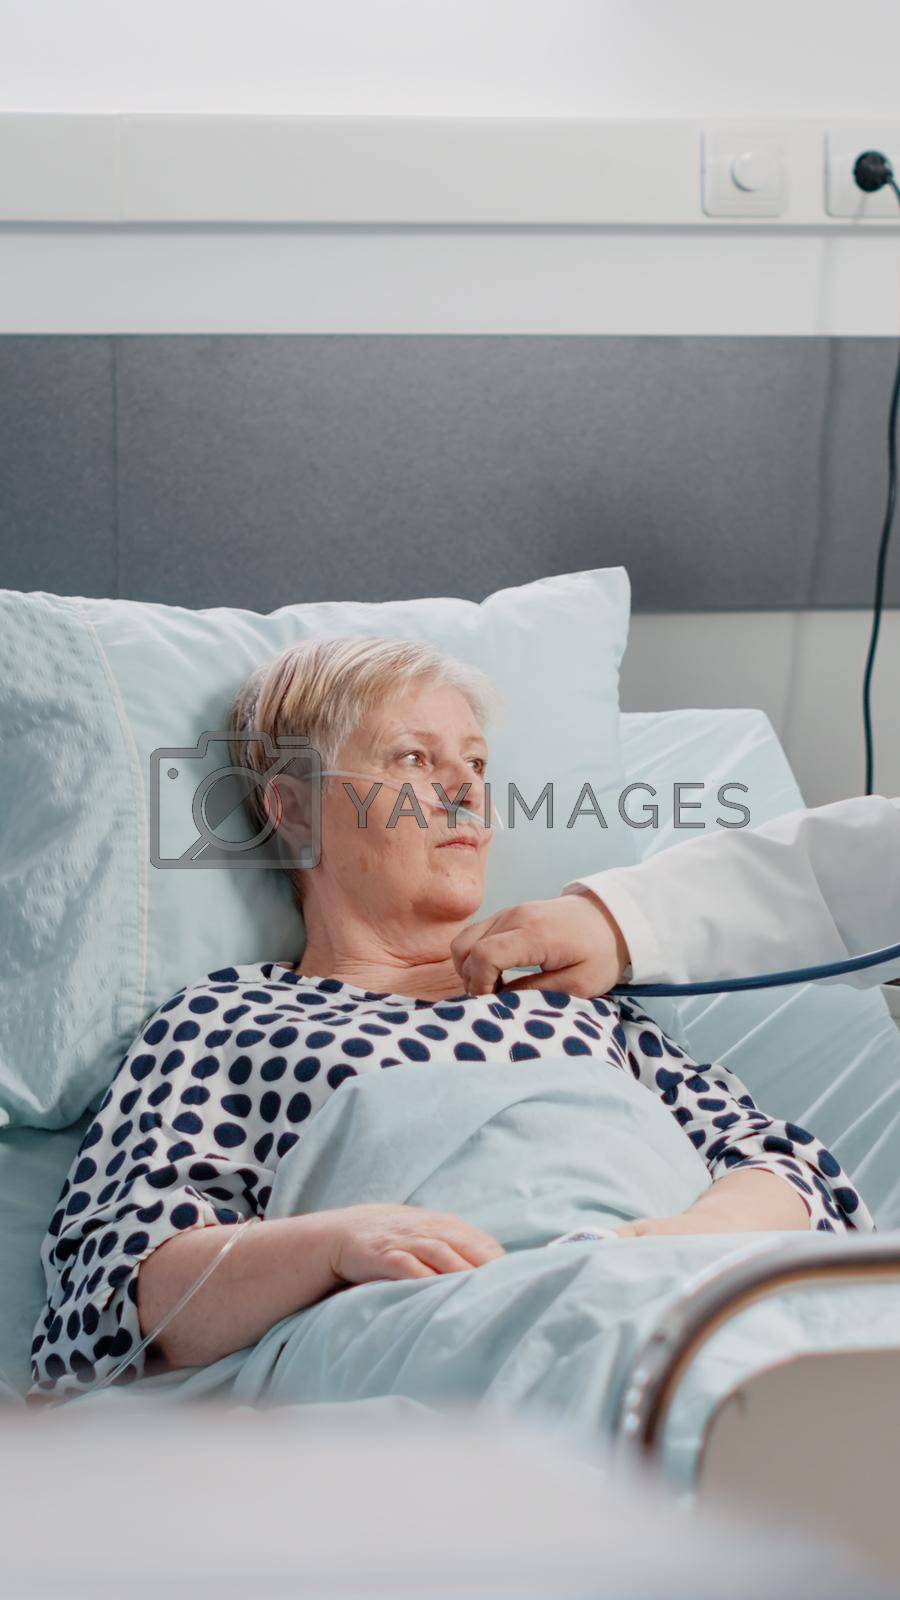 Medical team doing healthcare consultation for senior patient with illness. Doctor using stethoscope to examine sick woman with nasal oxygen tube in bed while nurse giving assistance